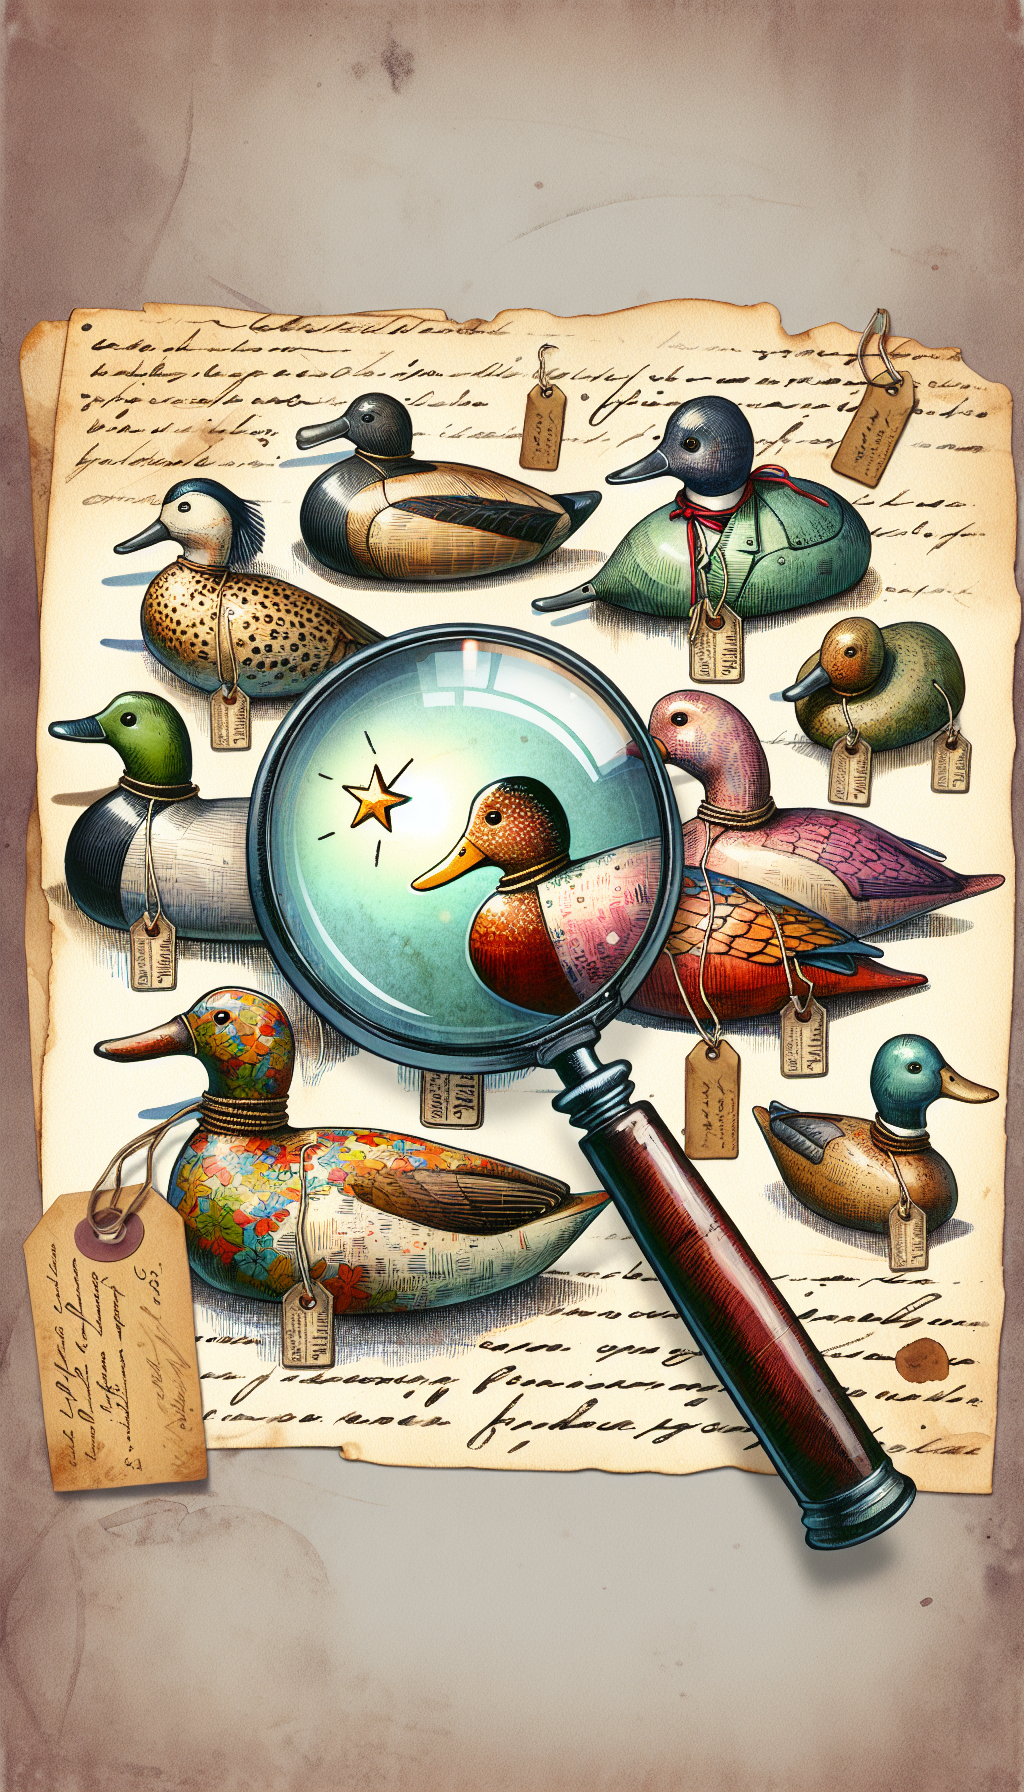 A vibrant watercolor vignette where a classic detective magnifying glass hovers over a lineup of whimsical, skillfully aged duck decoys against a muted, antique script background. The glass zooms in on the rarest decoy, which glows subtly, marked by a vintage star badge, symbolizing its 'most wanted' status while antique identification tags dangle from their necks.